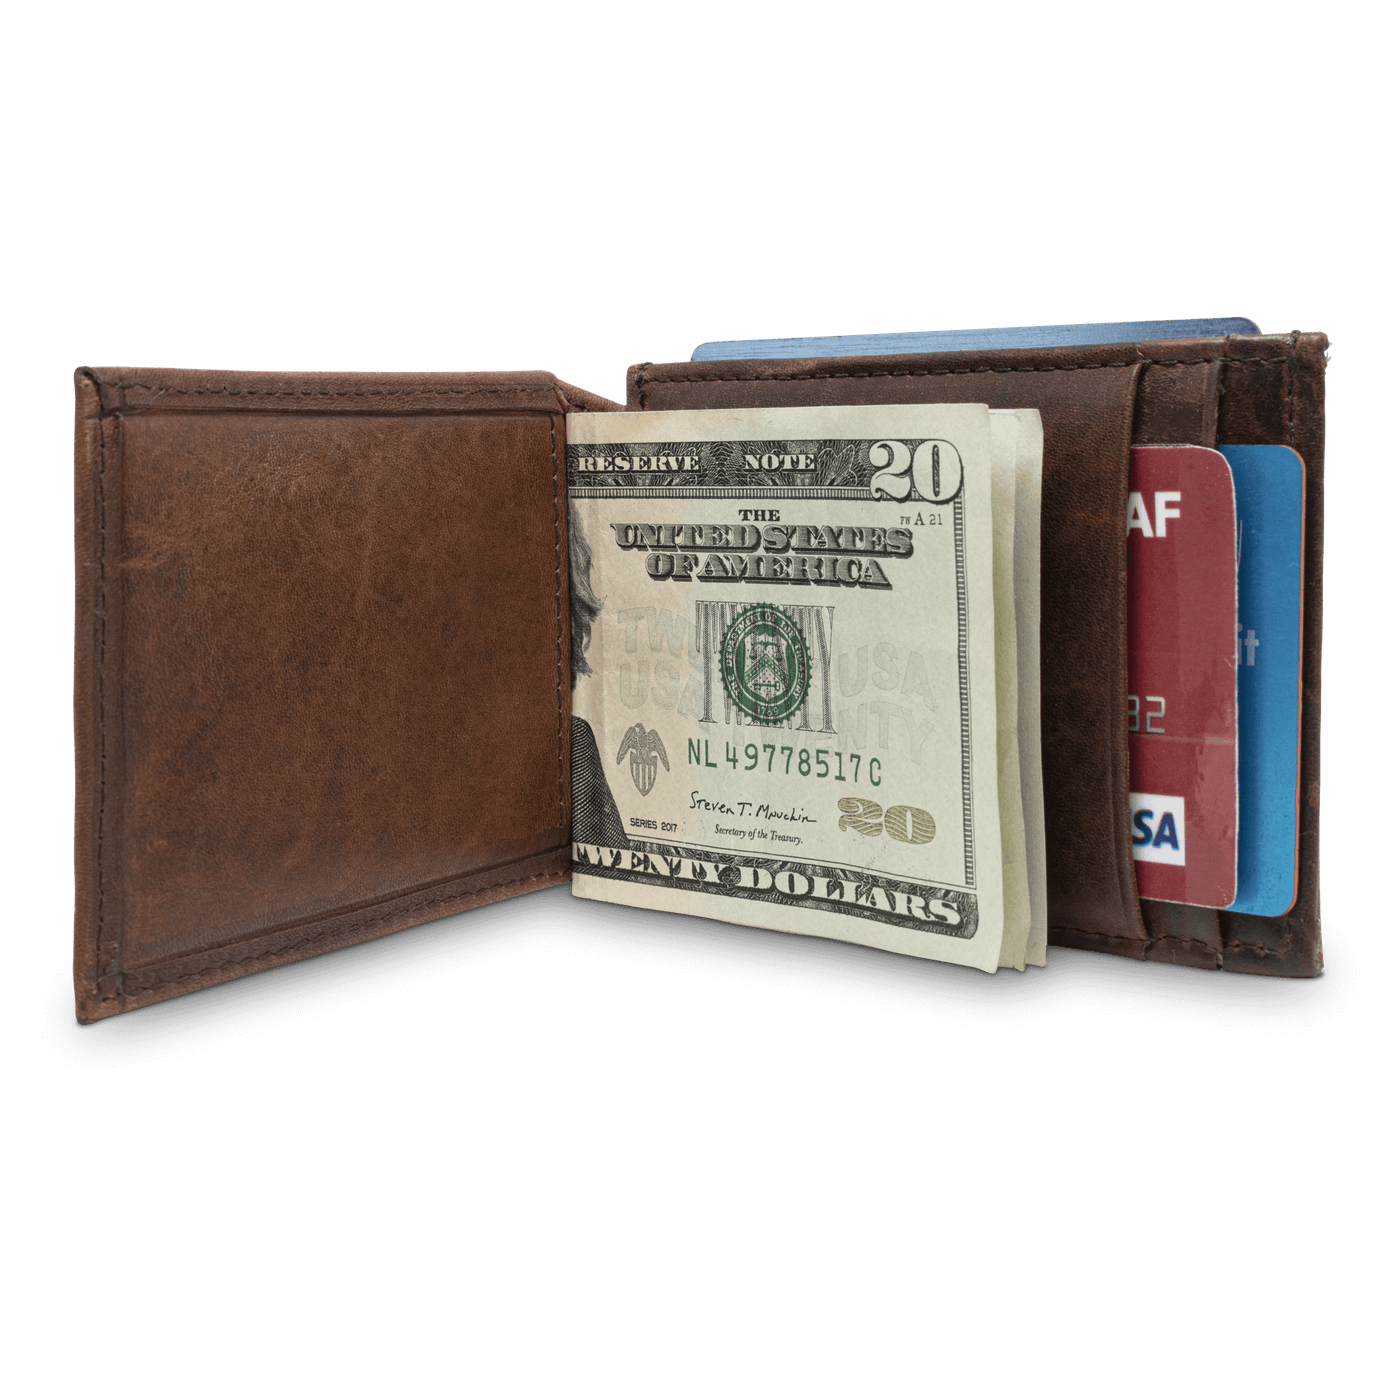 This Dynasty Front Pocket Shotshell Wallet with magnetic clip is created from a premier full grain leather along with a hand-oiled finish and shotshell concho, making it a perfect piece for any outdoor enthusiast. Ensure to get yours today! 4 Card Slots Center Bill Compartment ID Window 2 Exterior Easy Access Pockets Strong Magnetic Money Clip Slim Minimalist Design Weber’s Signature Shotshell Concho Magnetic Clip Holds: 10+ Bills Dimensions: 4"L x 2.75"H RFID Protection Color: Brown